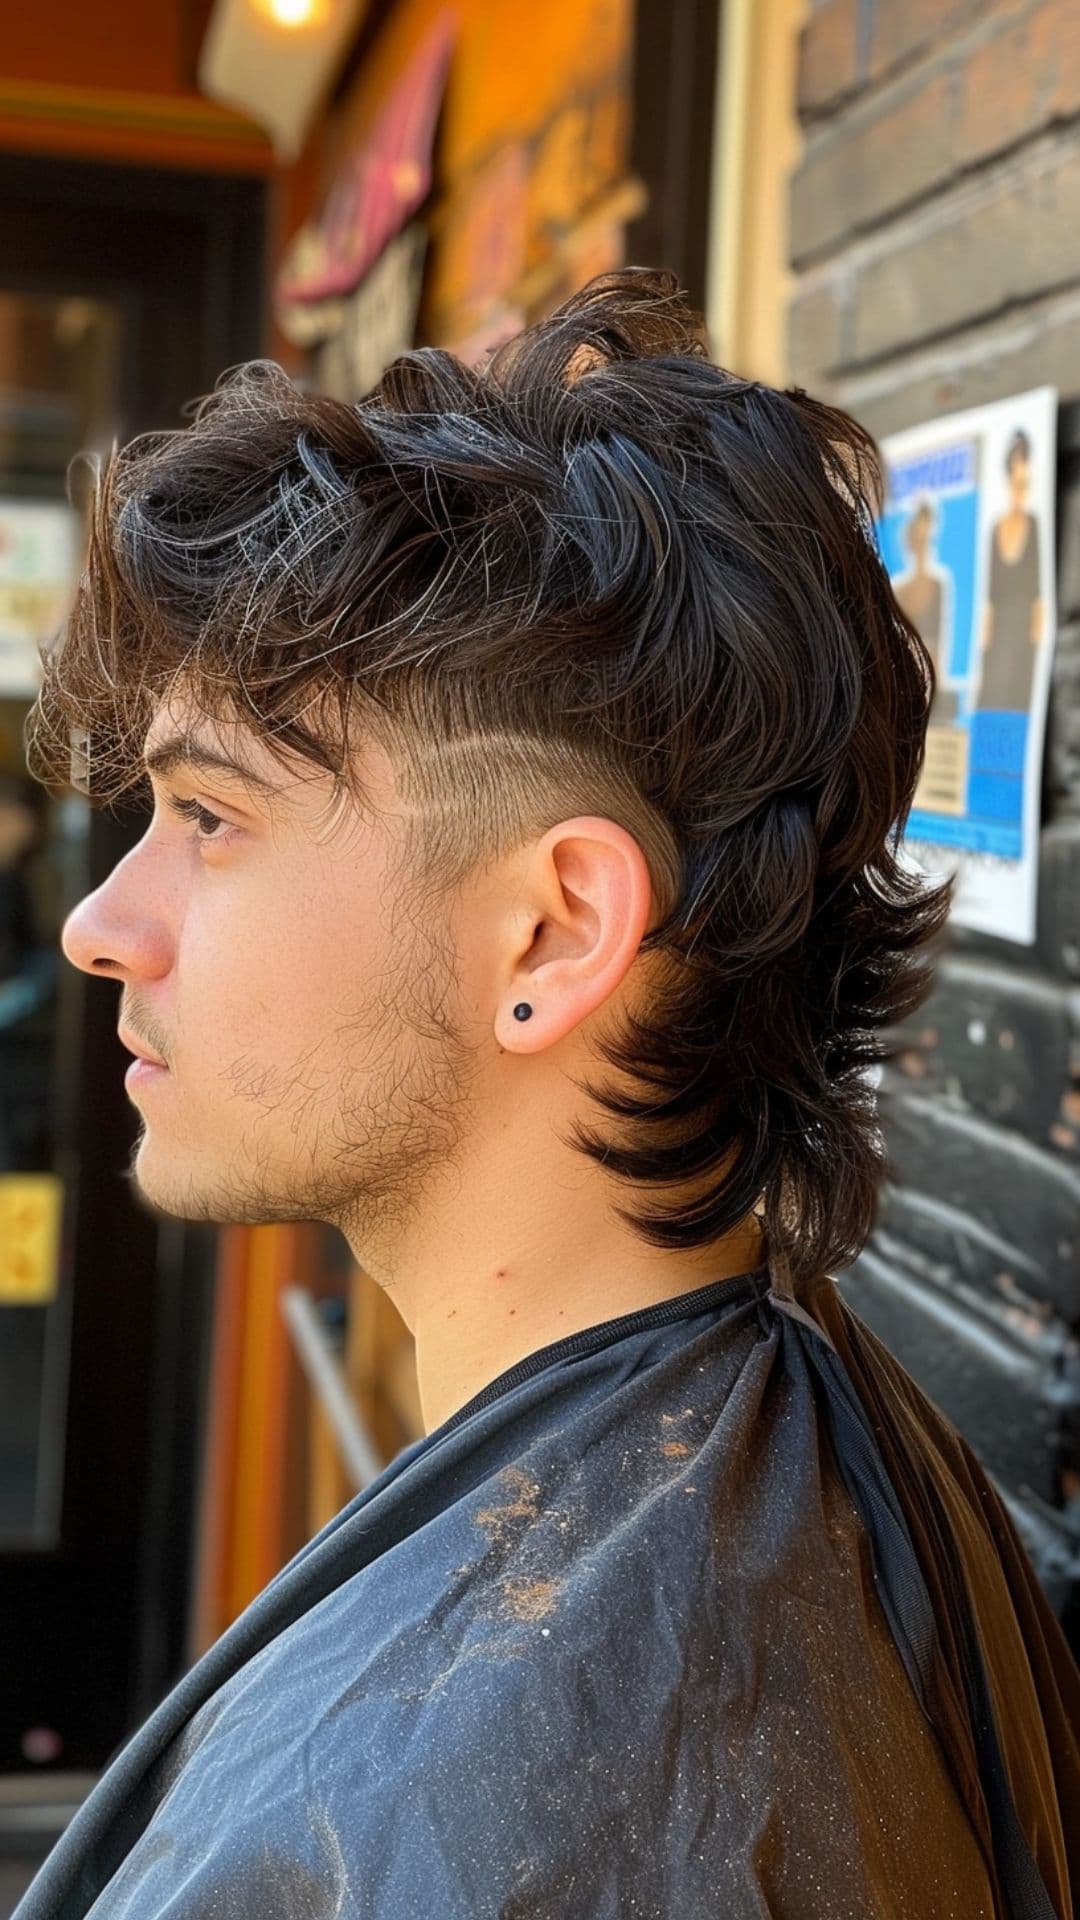 A man modelling a mullet fade hair.